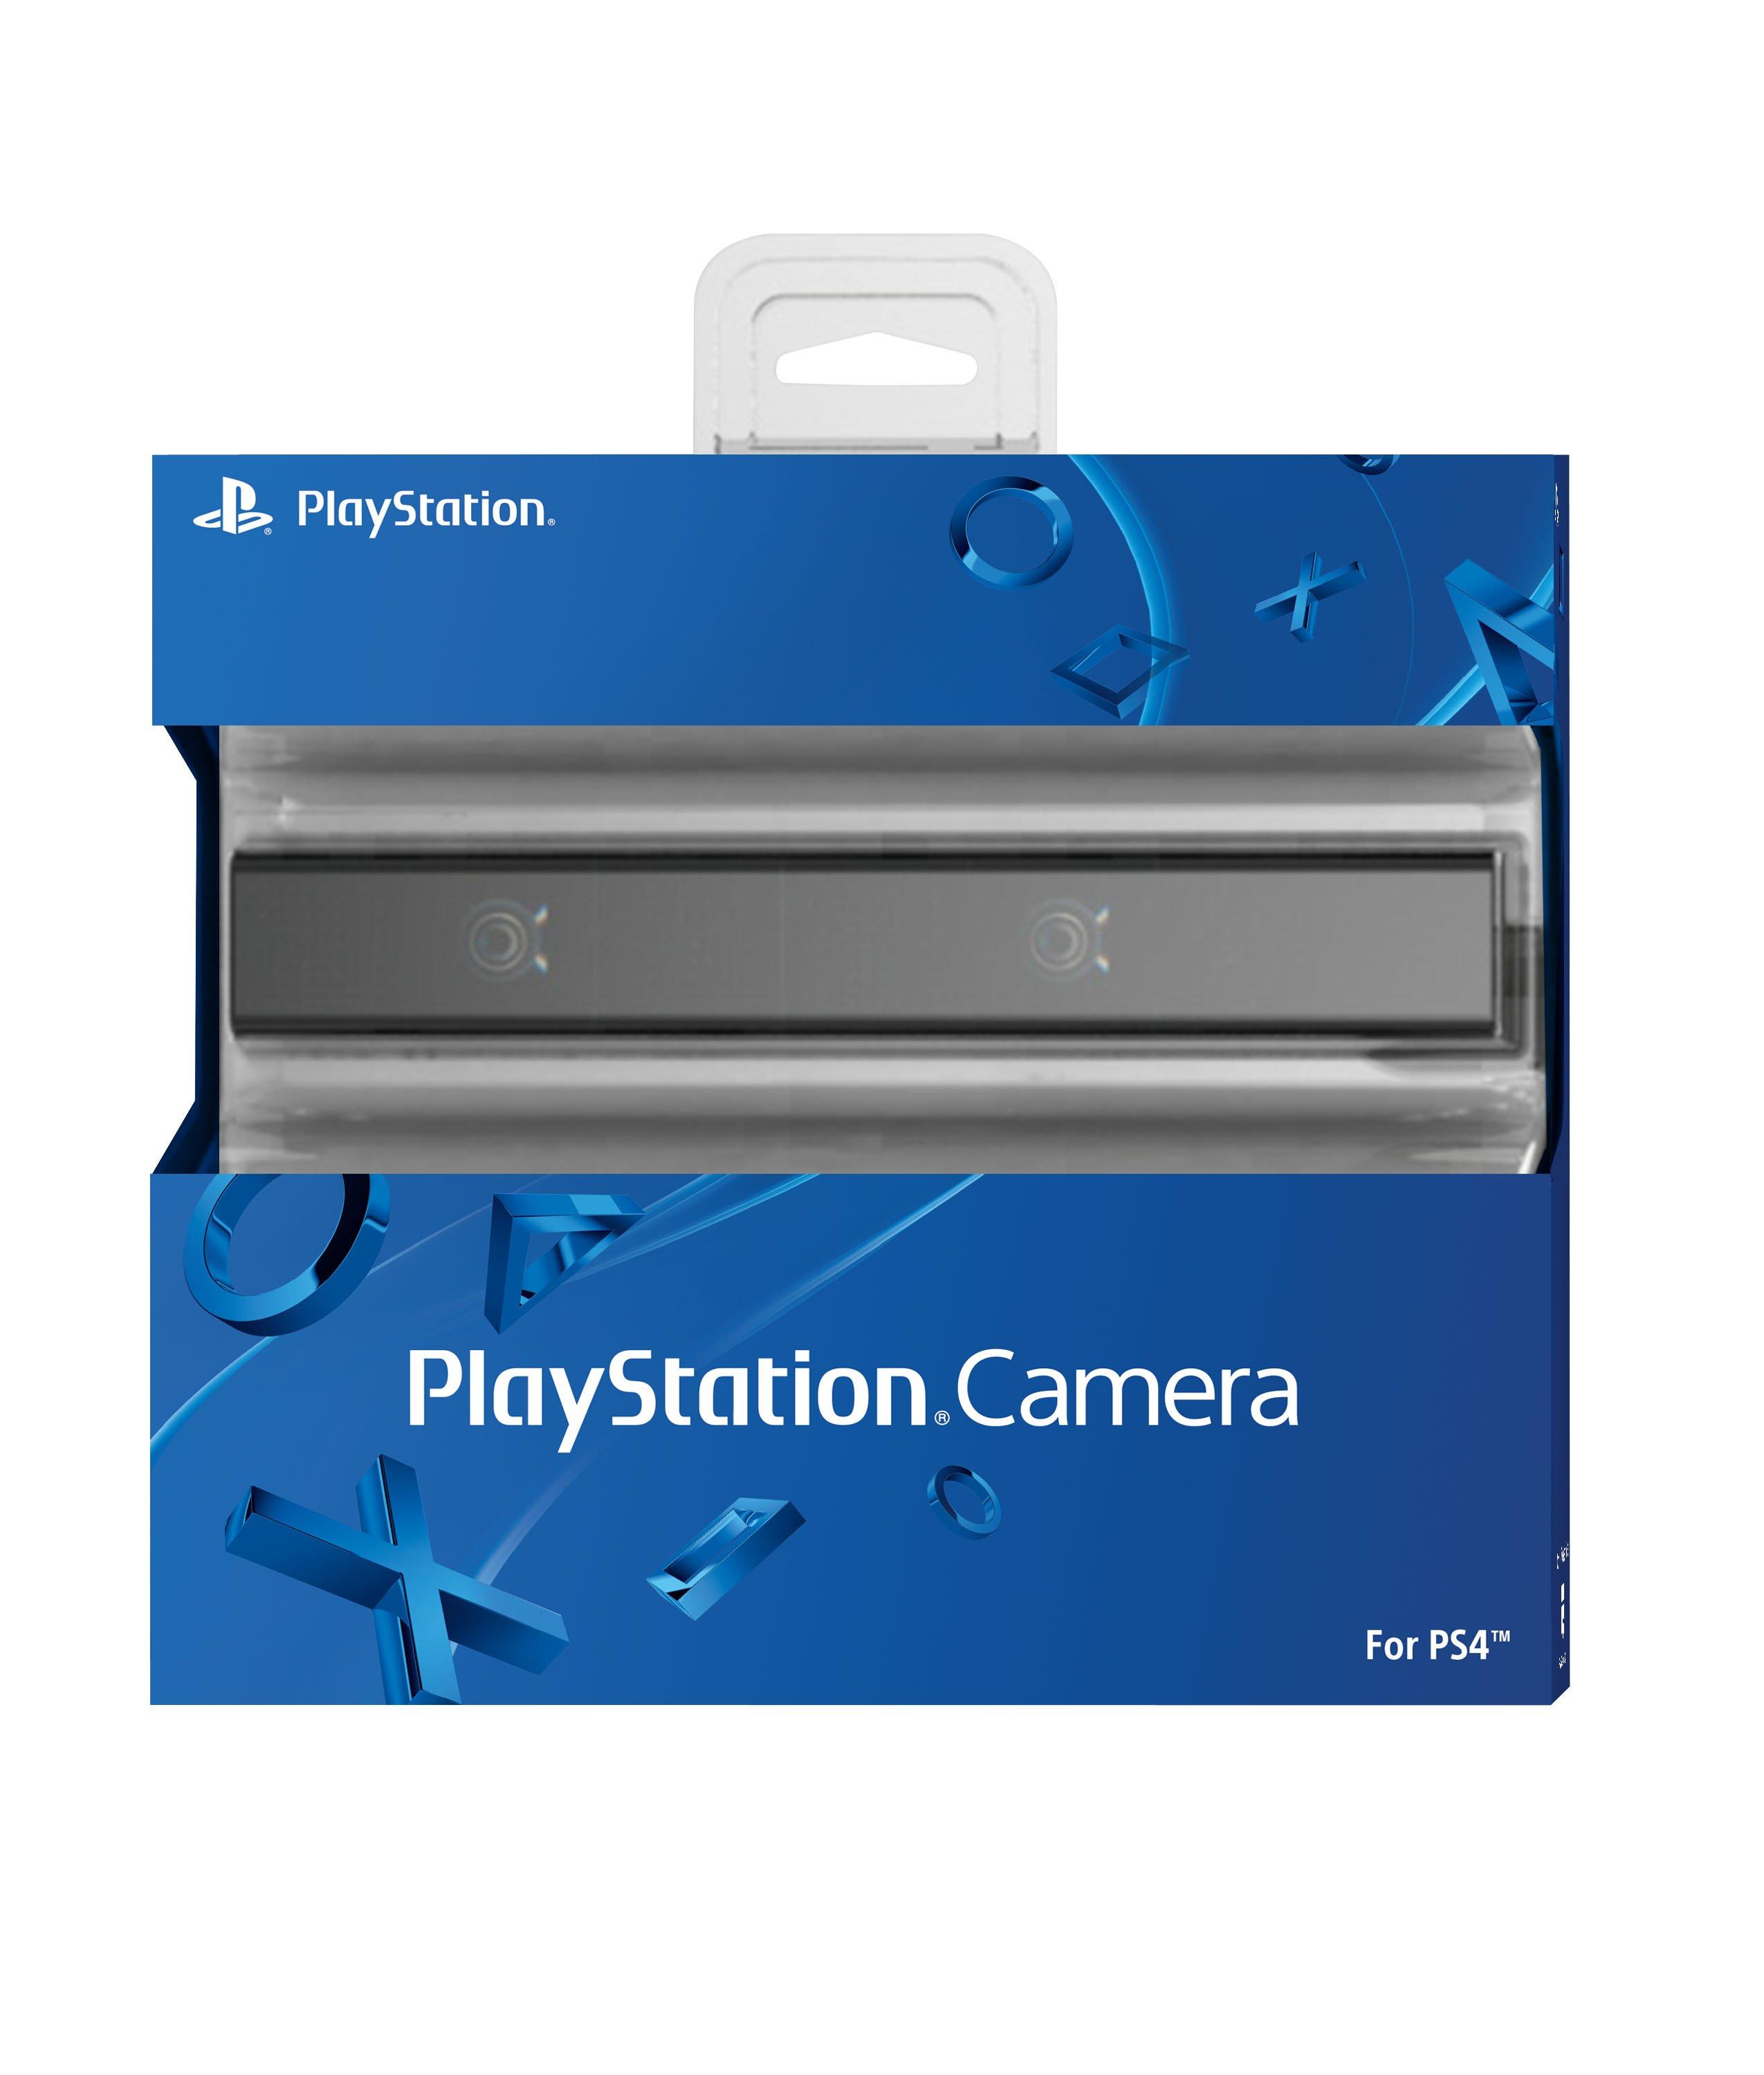 PlayStation Cameras For PS4 - Shop PlayStation cameras for PS4